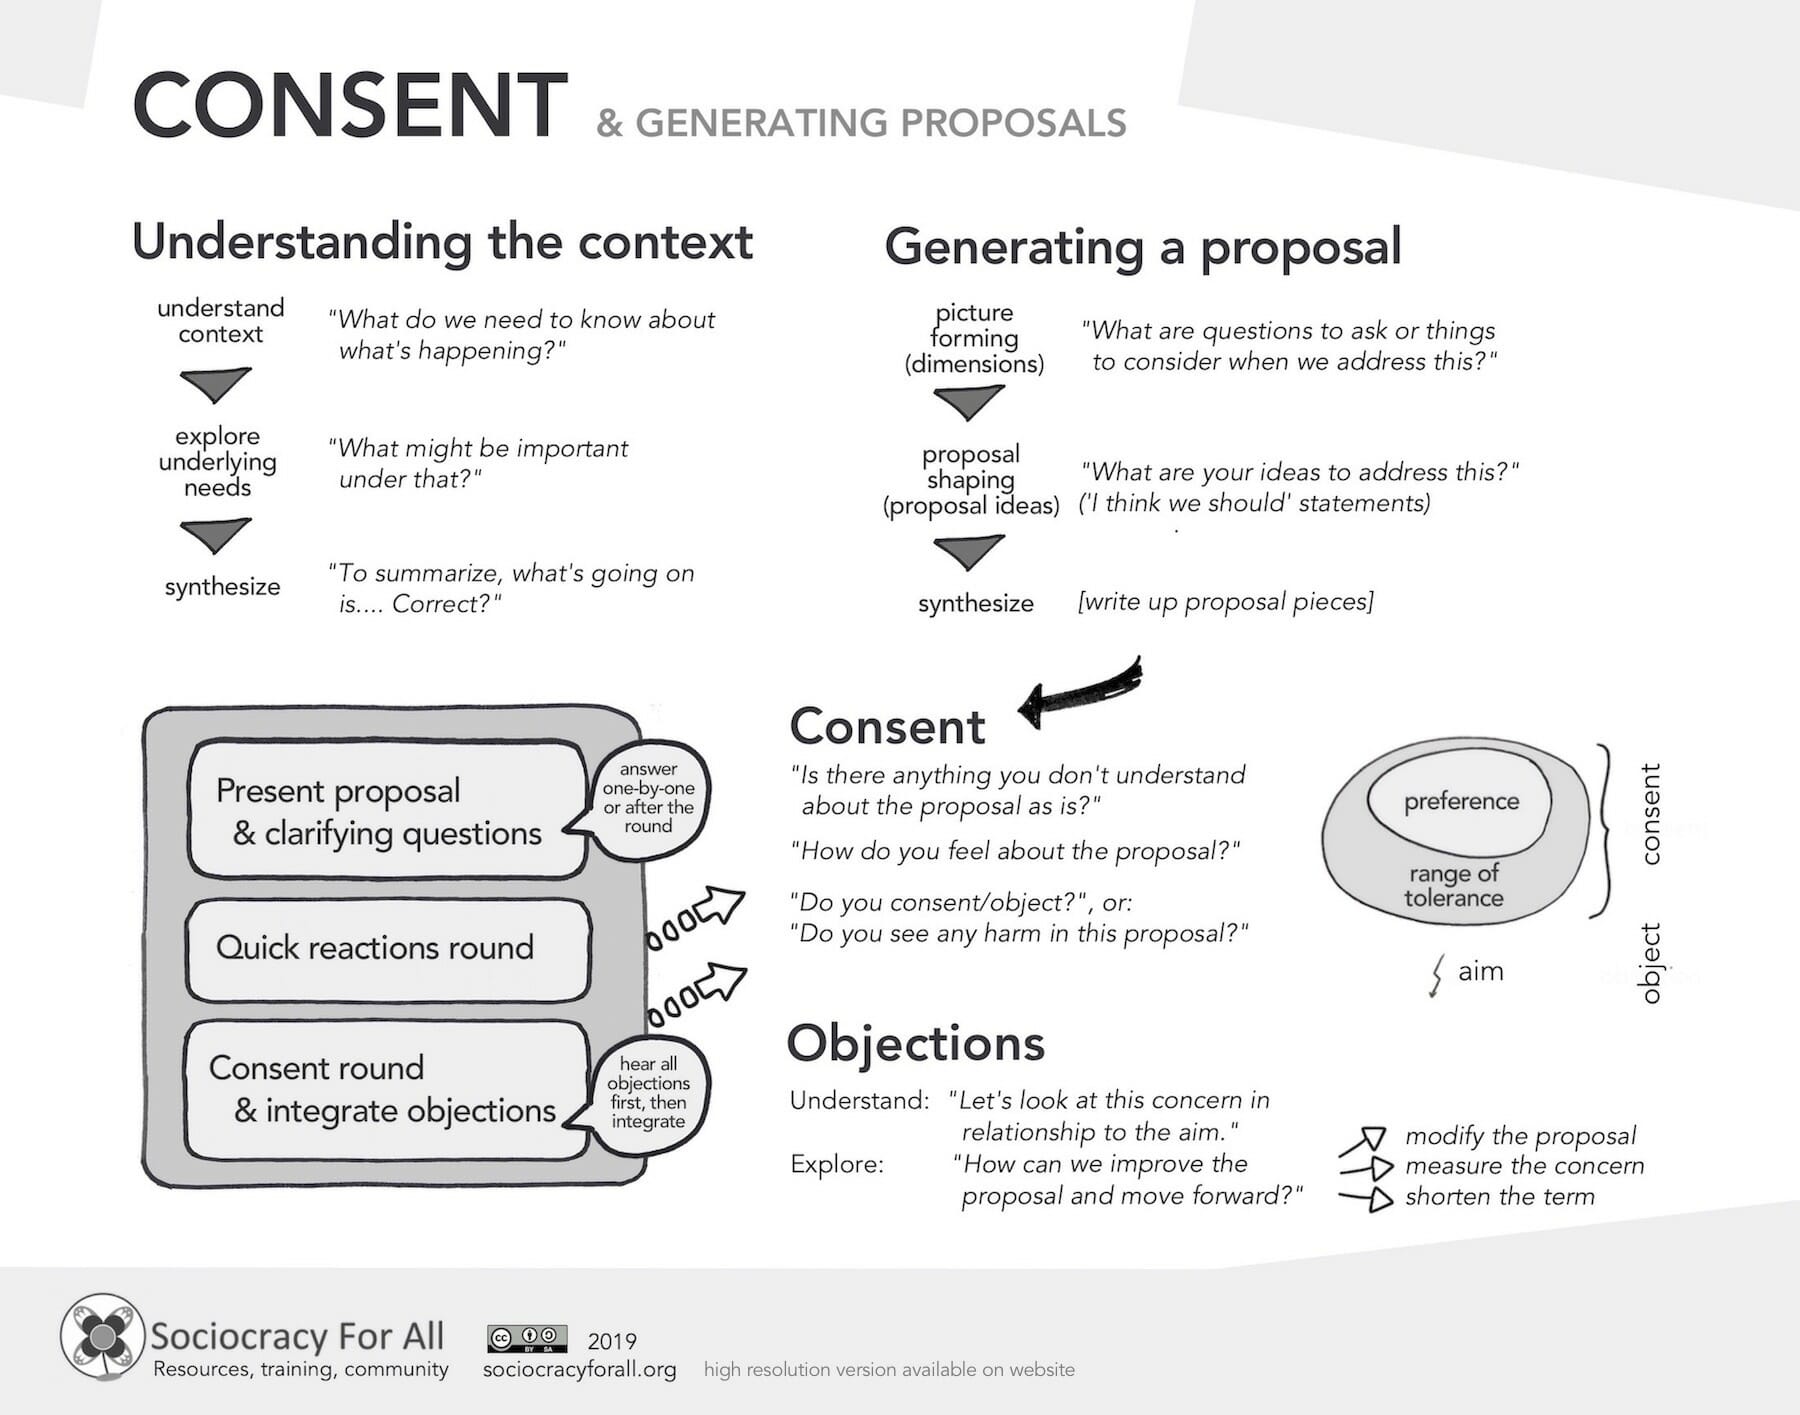 Image of downloadable poster with instructions for forming proposals and the consent decision-making process in sociocracy. Includes proposal generation, consent, and objections.